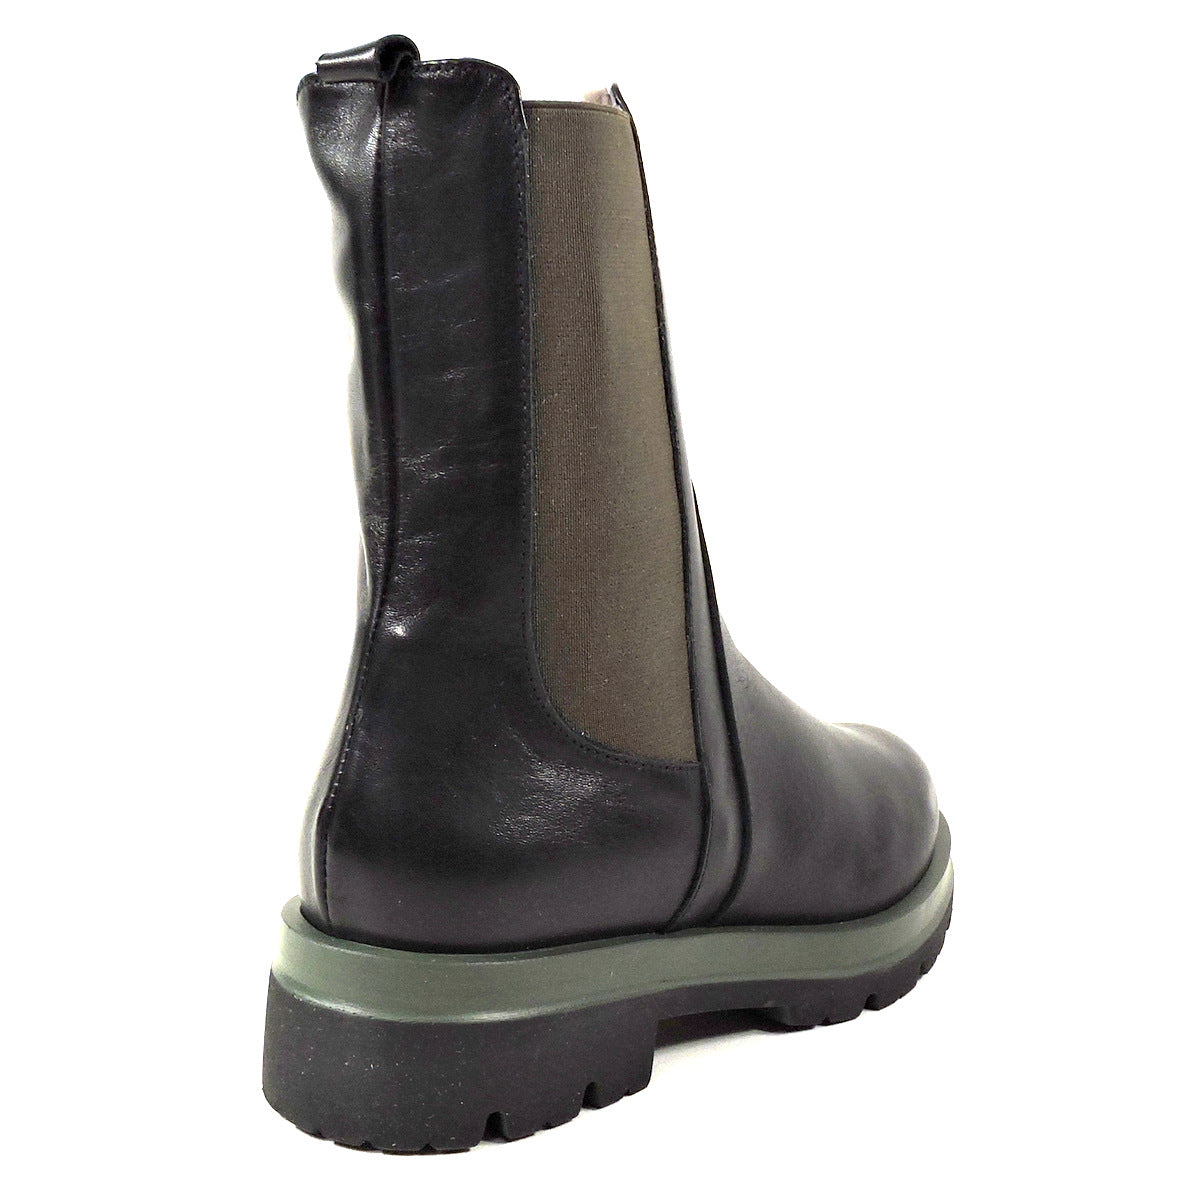 SOFFICE SOGNO 🇮🇹 WOMEN'S BLACK SOFT LEATHER WINTER BOOTS